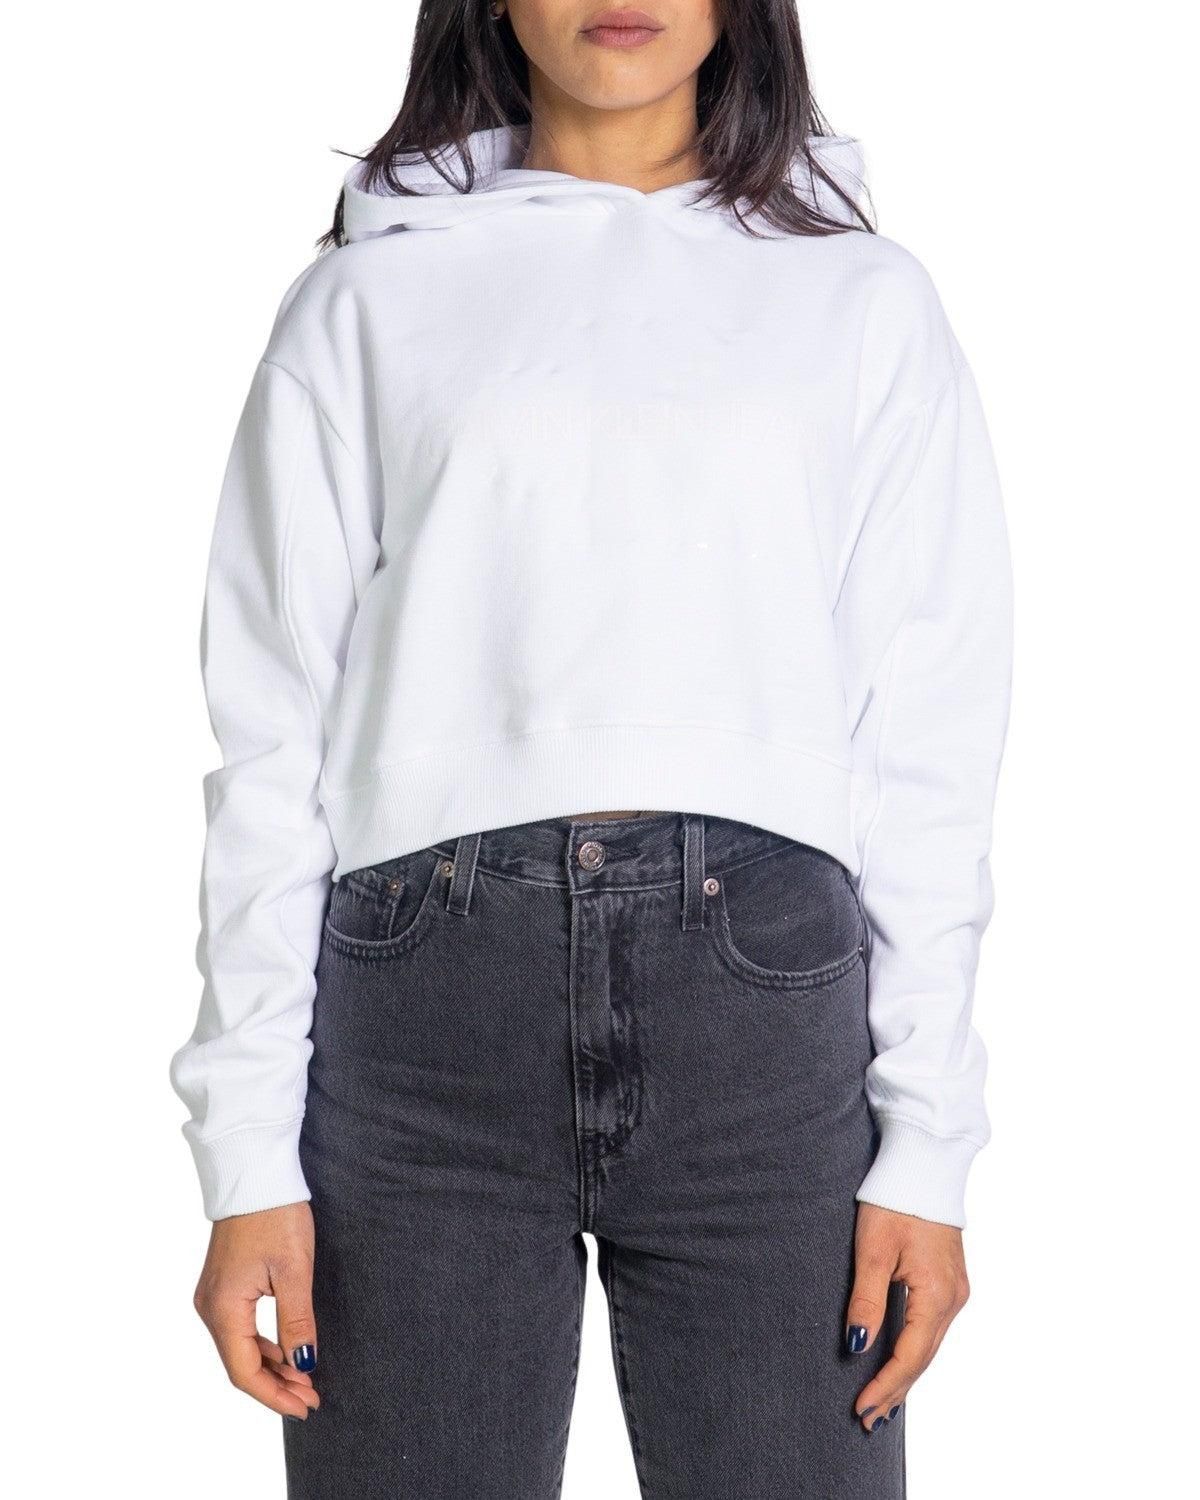 Brand: Calvin Klein Jeans
Gender: Women
Type: Sweatshirts
Season: Spring/Summer

PRODUCT DETAIL
• Color: white
• Pattern: print
• Fastening: slip on
• Sleeves: long
• Collar: hood

COMPOSITION AND MATERIAL
• Composition: -100% cotton 
•  Washing: machine wash at 30°